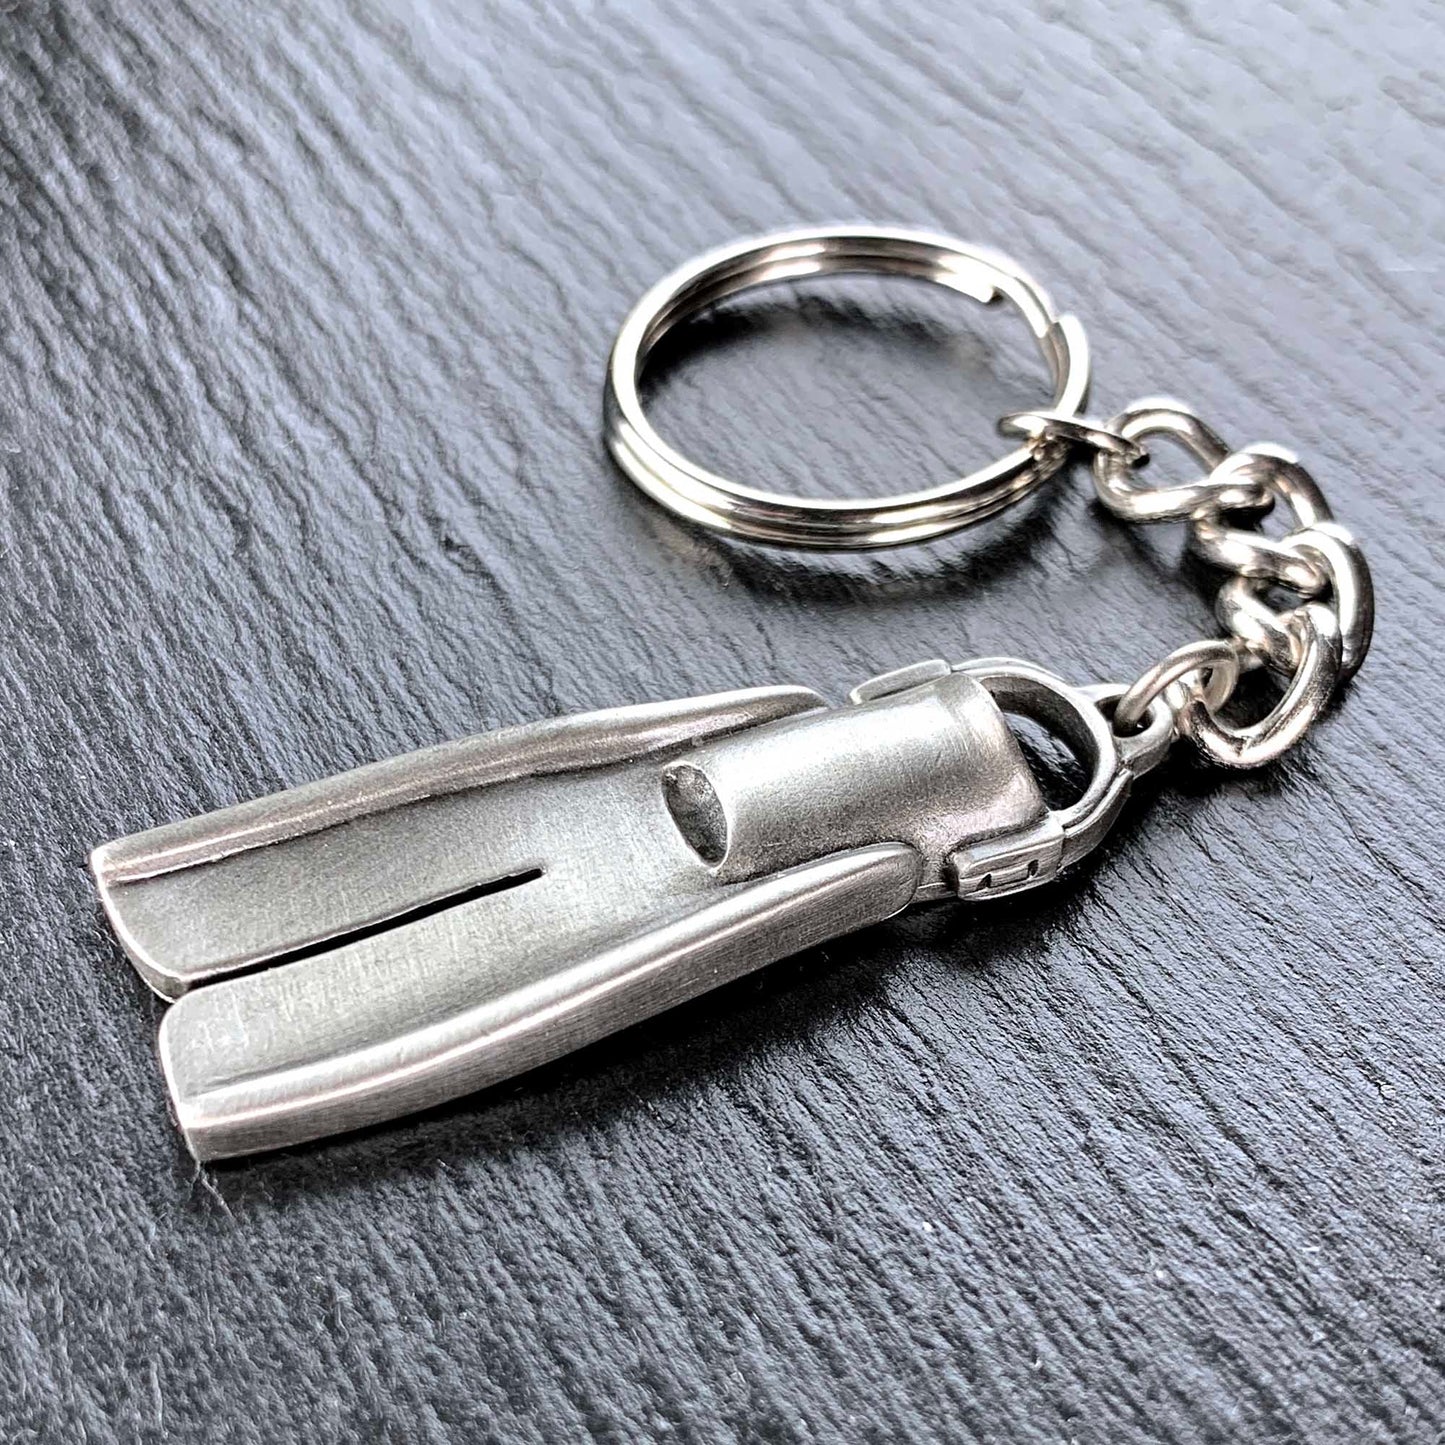 Dive Fin Keychain for Men and Women- Scuba Keychain, Dive Flipper Key Ring, Gifts for Scuba Divers, Scuba Diving Key Fob, Dive Fin Lanyard - The Tool Store